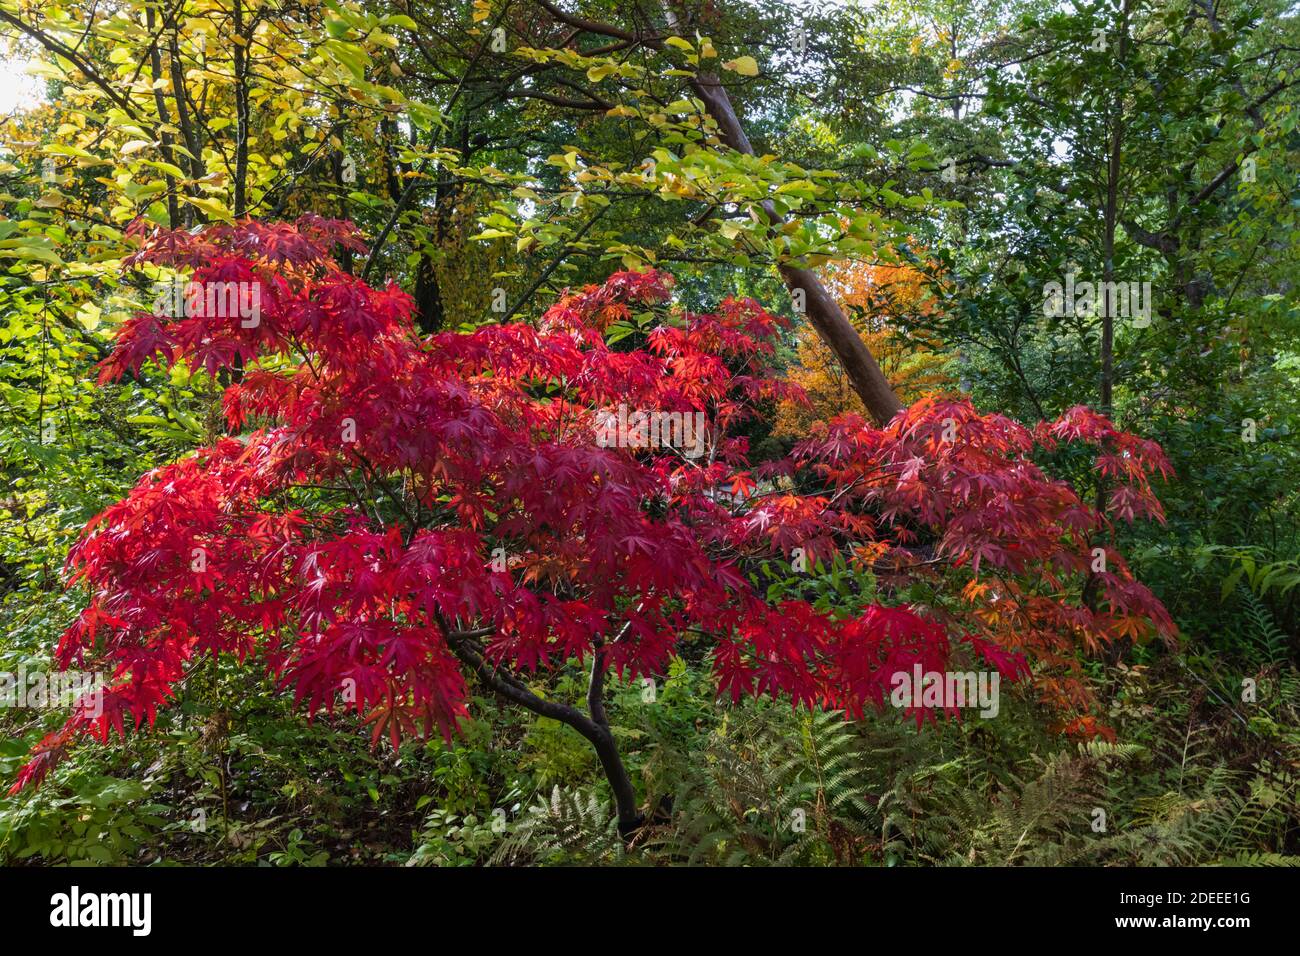 England, Surrey, Guildford, RHS Wisley, Autumn Colours Stock Photo